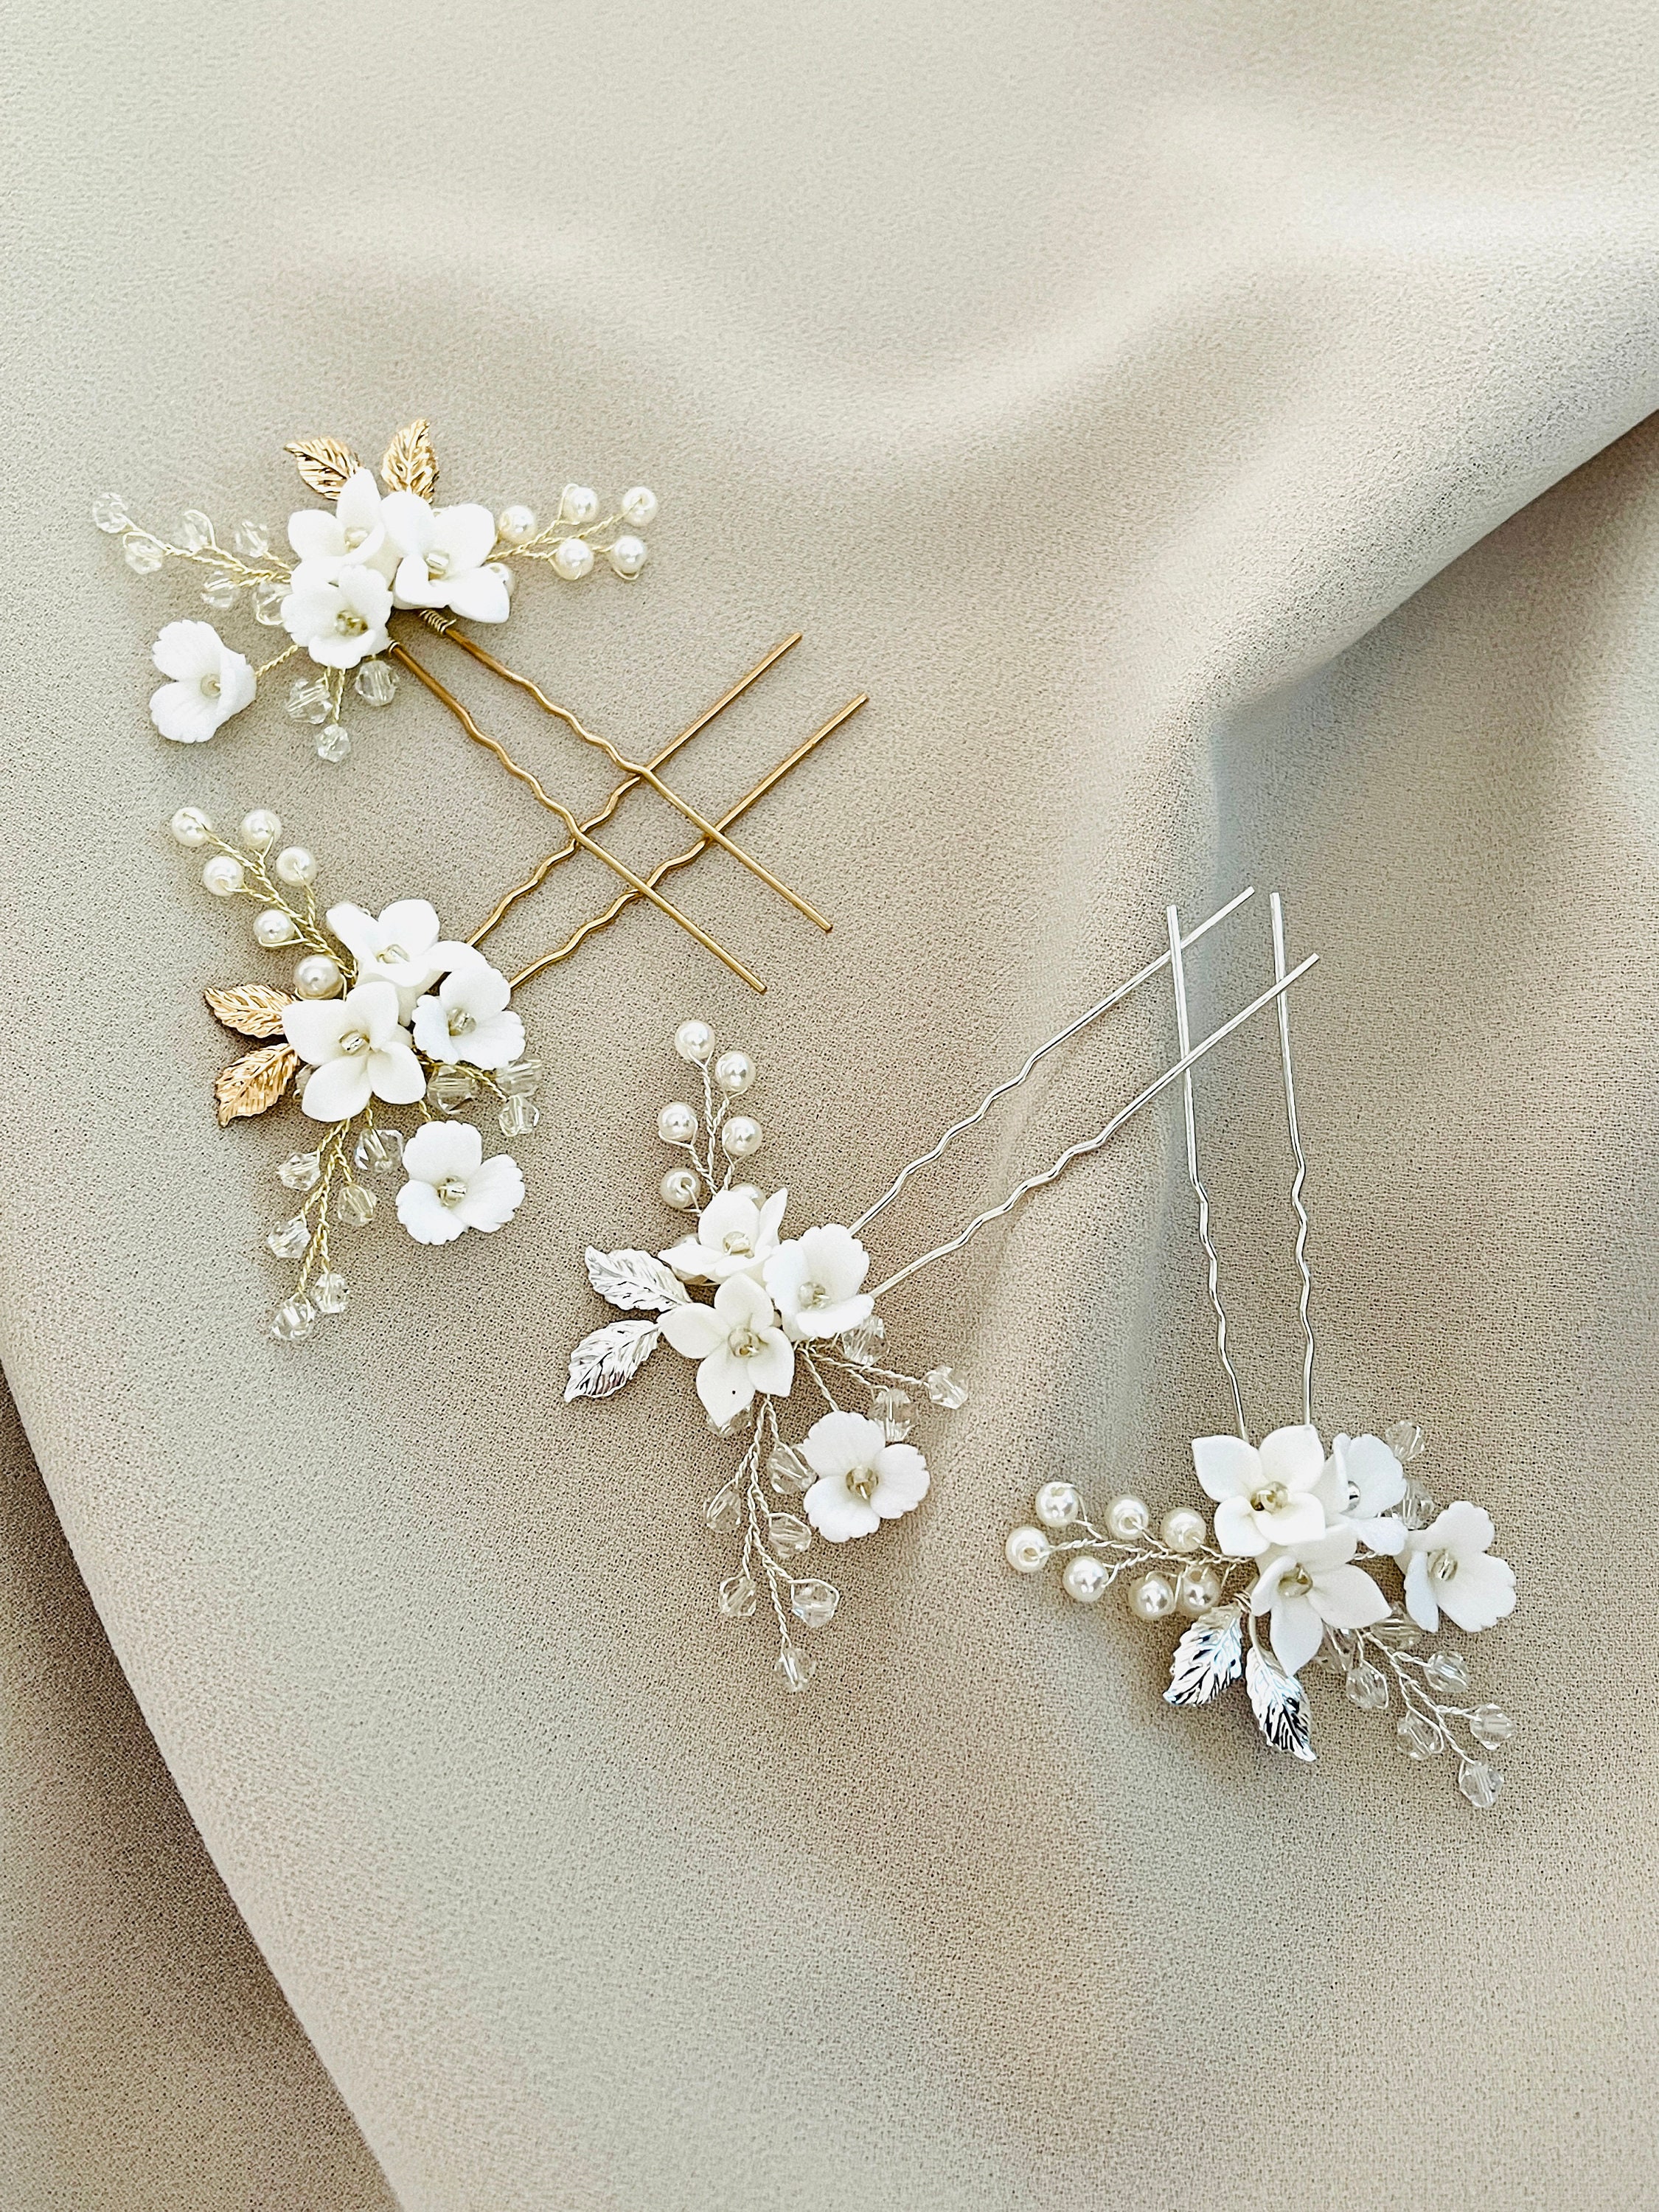 Boho Hair Accessories Clear Glass Crystal Victorian Rose Decorative Bobby Pins Faux Pearl Crystal Rhinestone GEMSICLES GIFTS AH1014 White Rose Blue Flower Hair Jewels 7-Piece Hairpin Set 